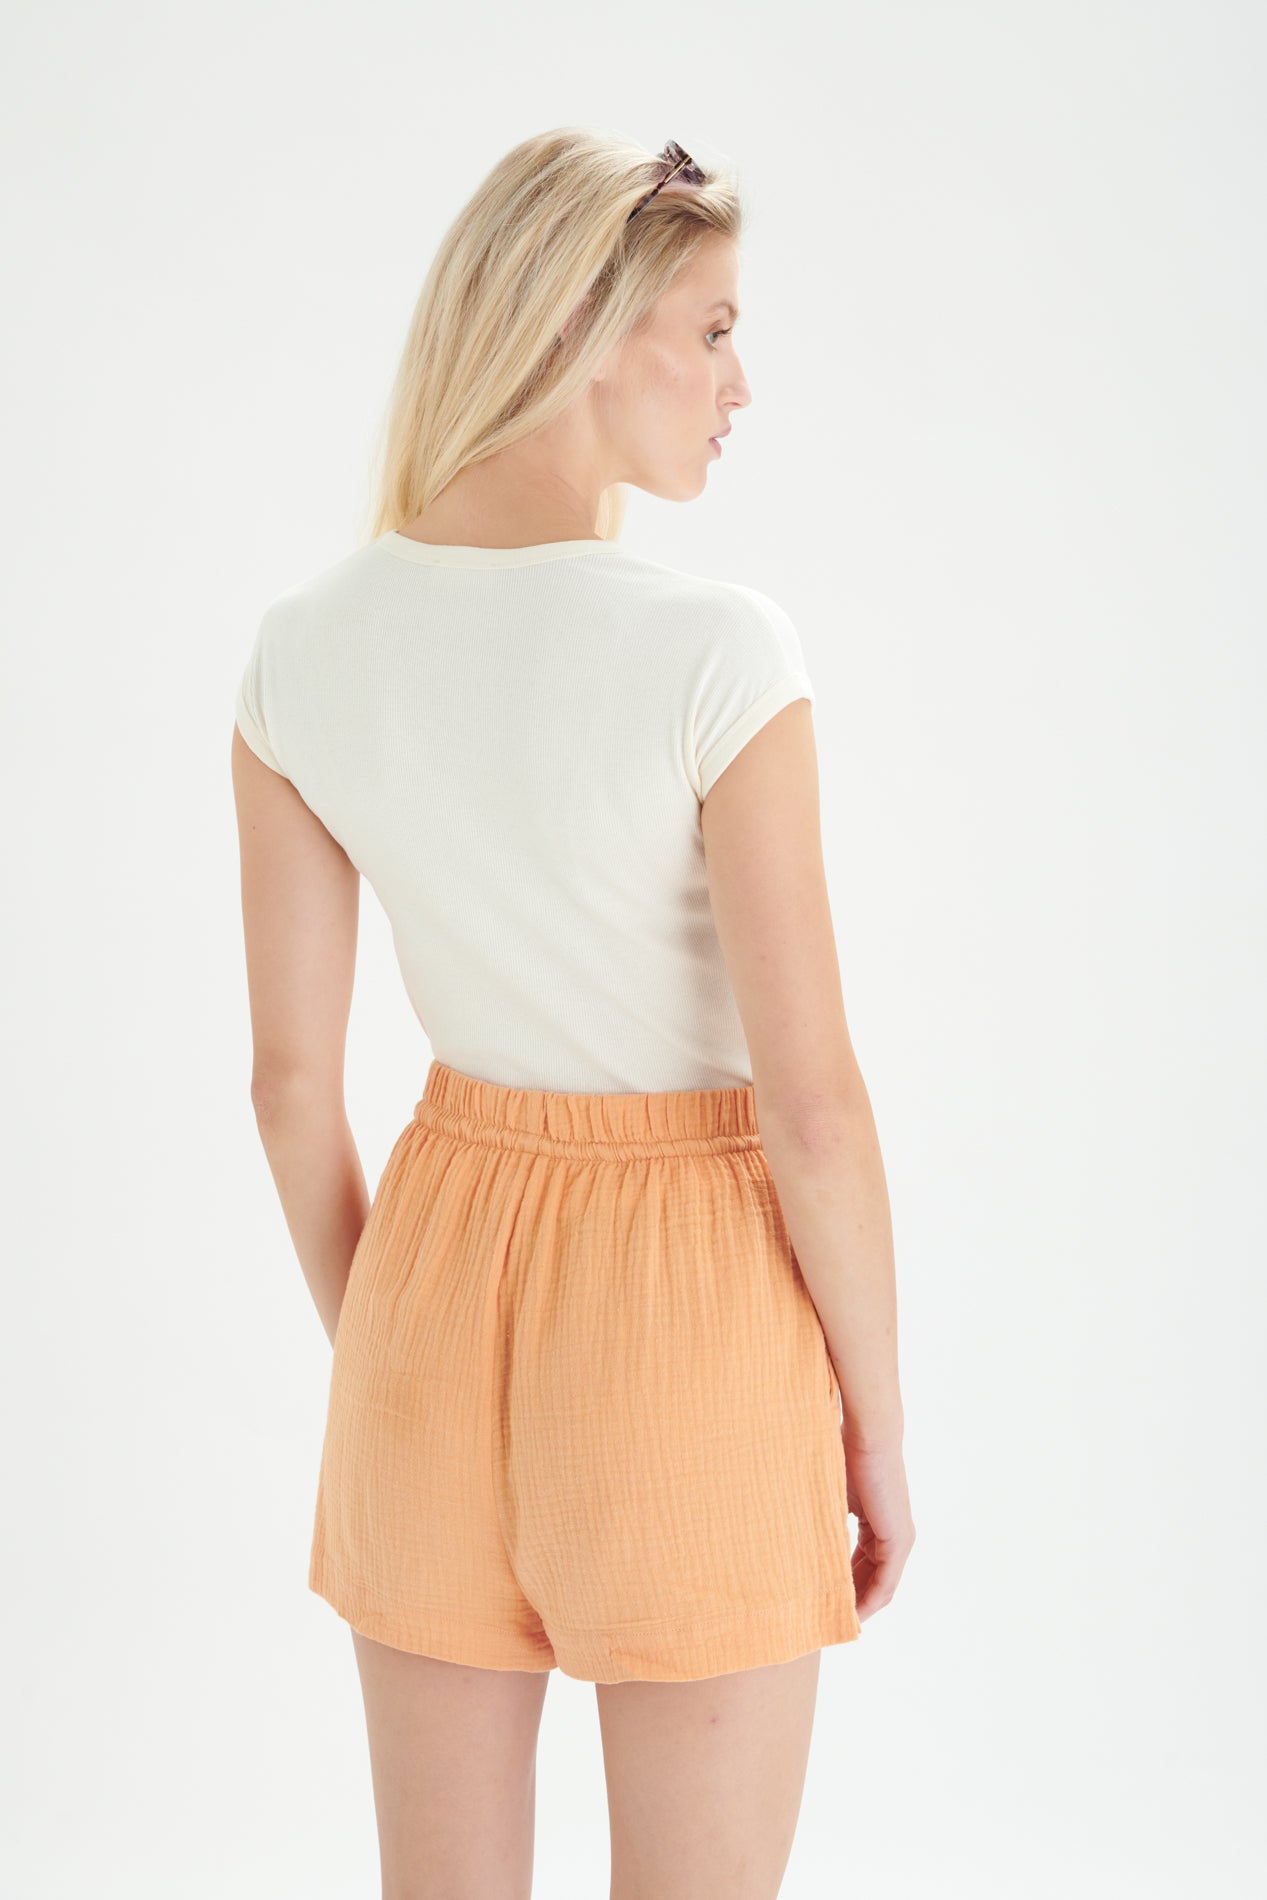 Shorts in Apricot